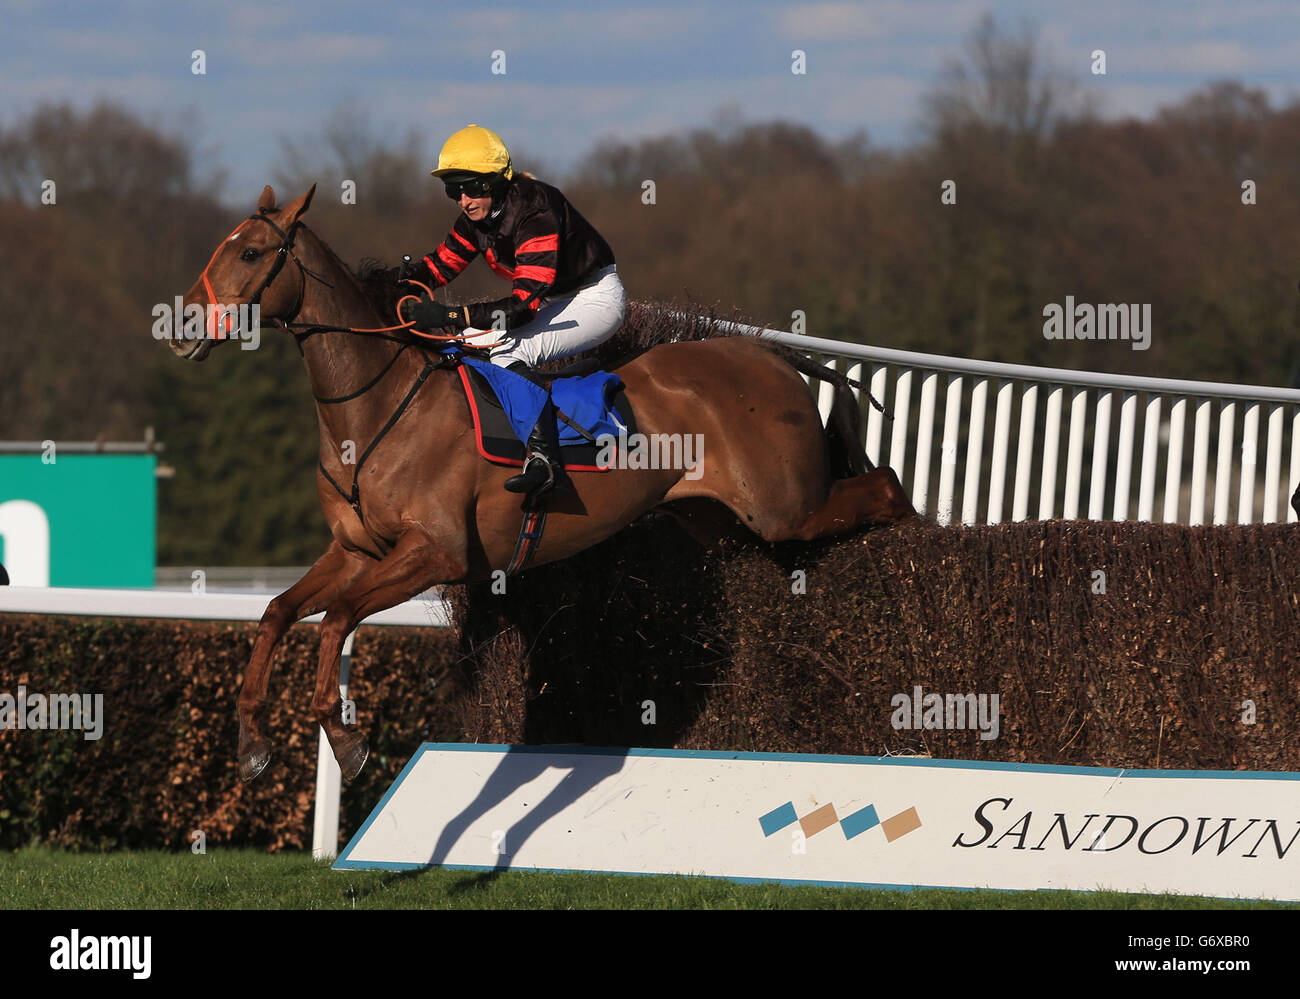 Bradley ridden by LBdr Sally Randall clears the final fence to win The Grand Military Gold Cup, during the Grand Military Gold Cup Day at Sandown Park, Sandown. Stock Photo